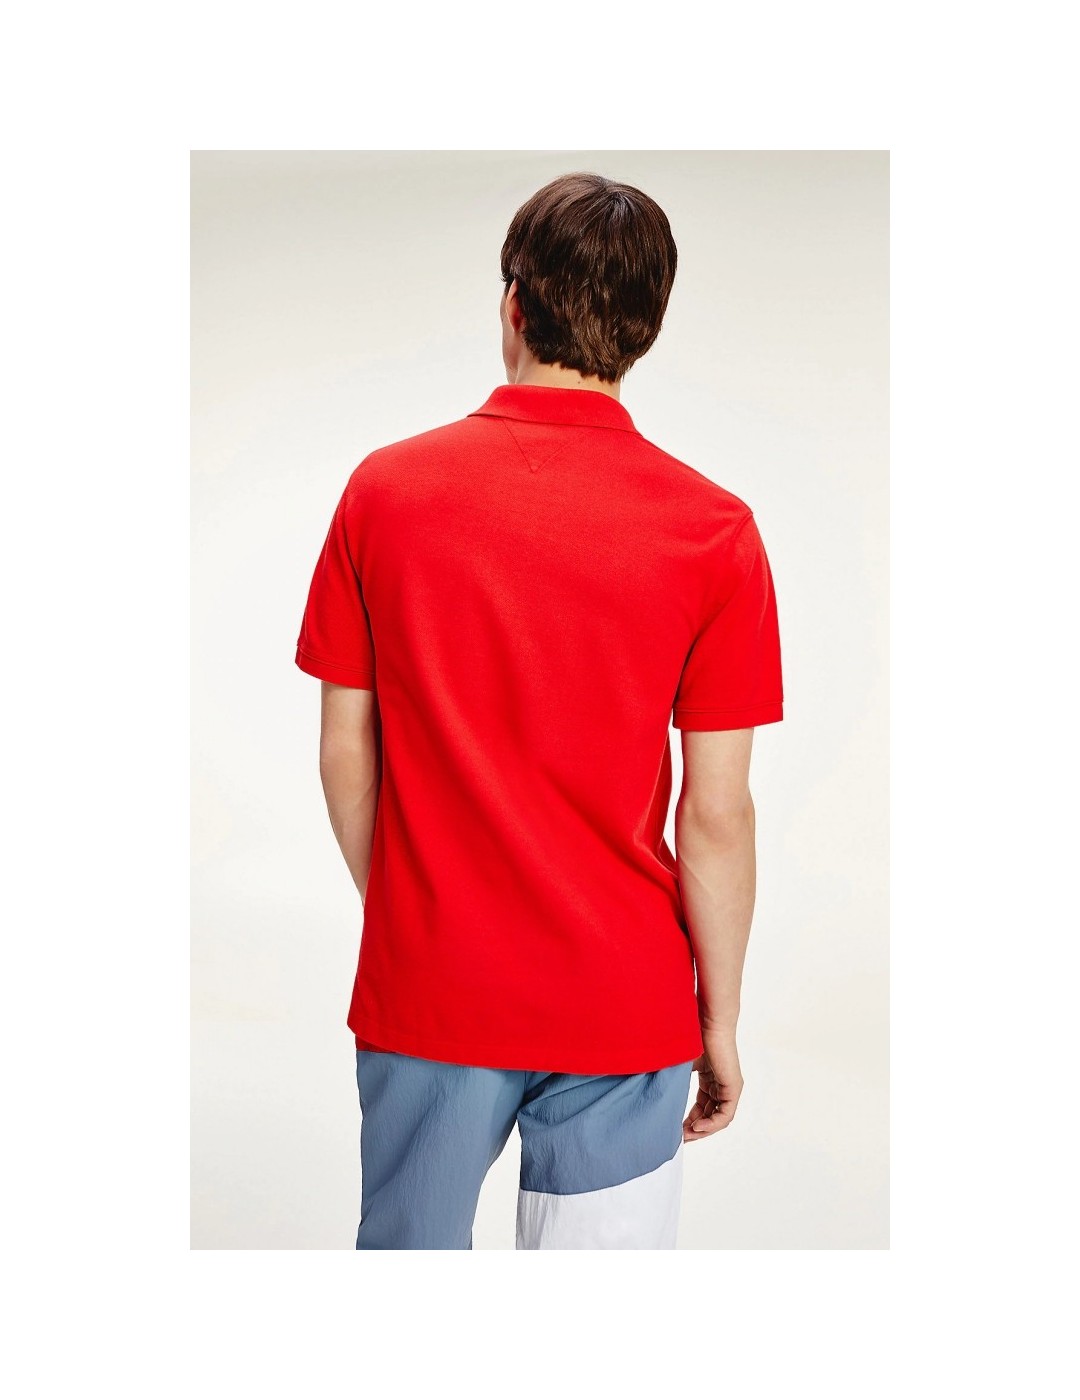 CAMISETA TOMMY JEANS TOMMY BADGE POLO DEEP CRISMON